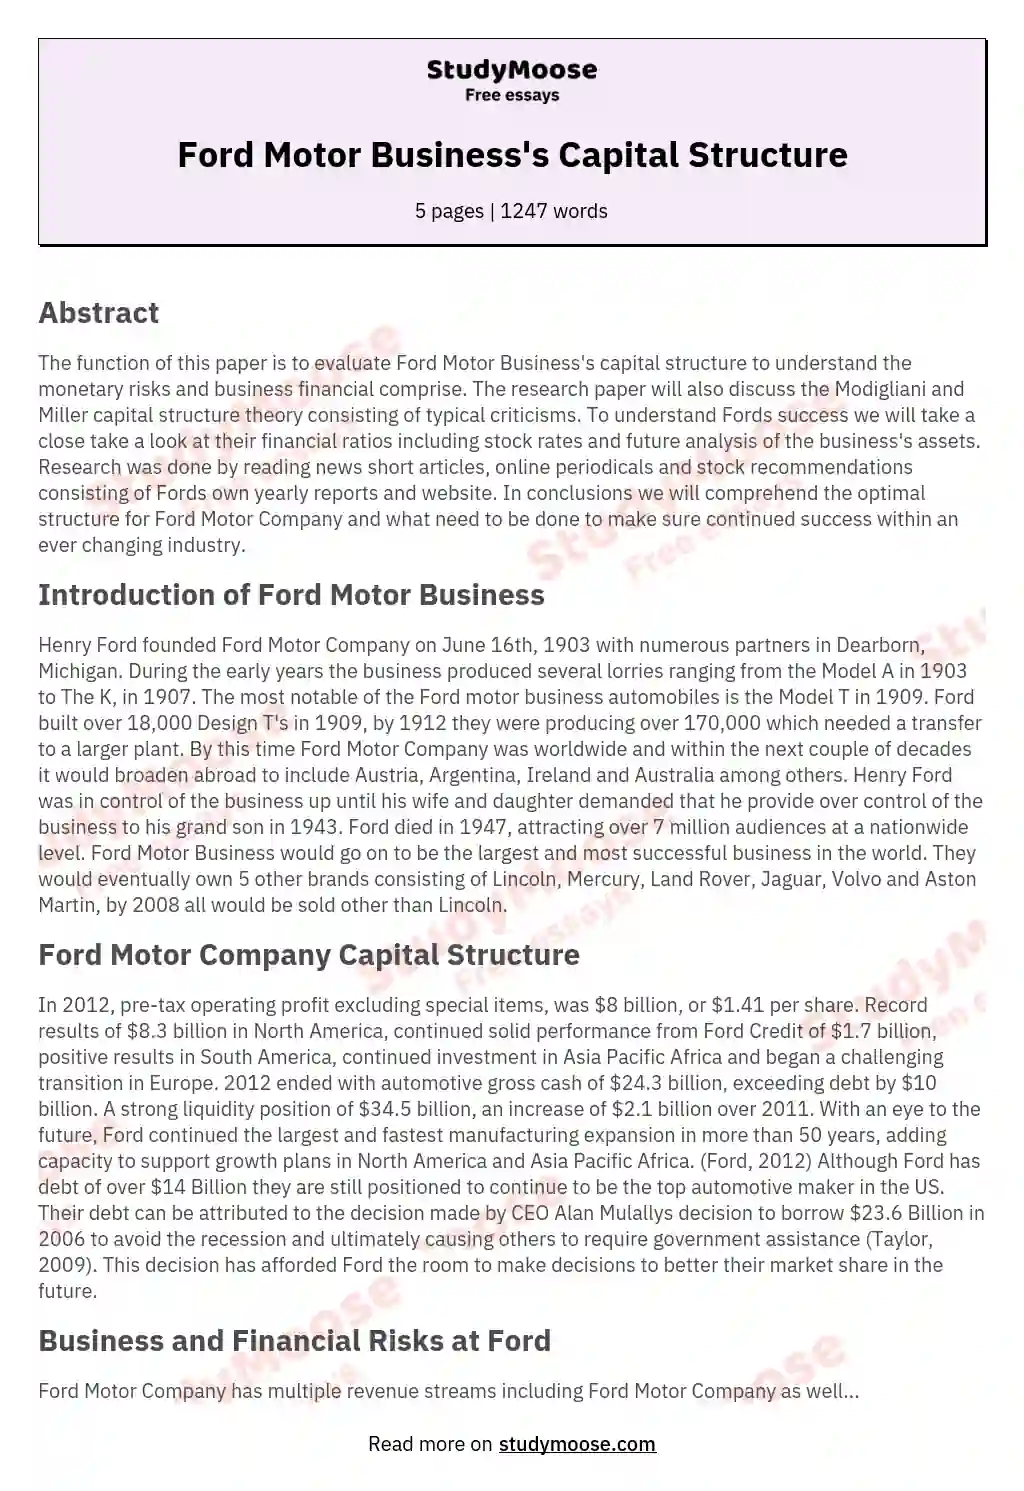 Ford Motor Business's Capital Structure